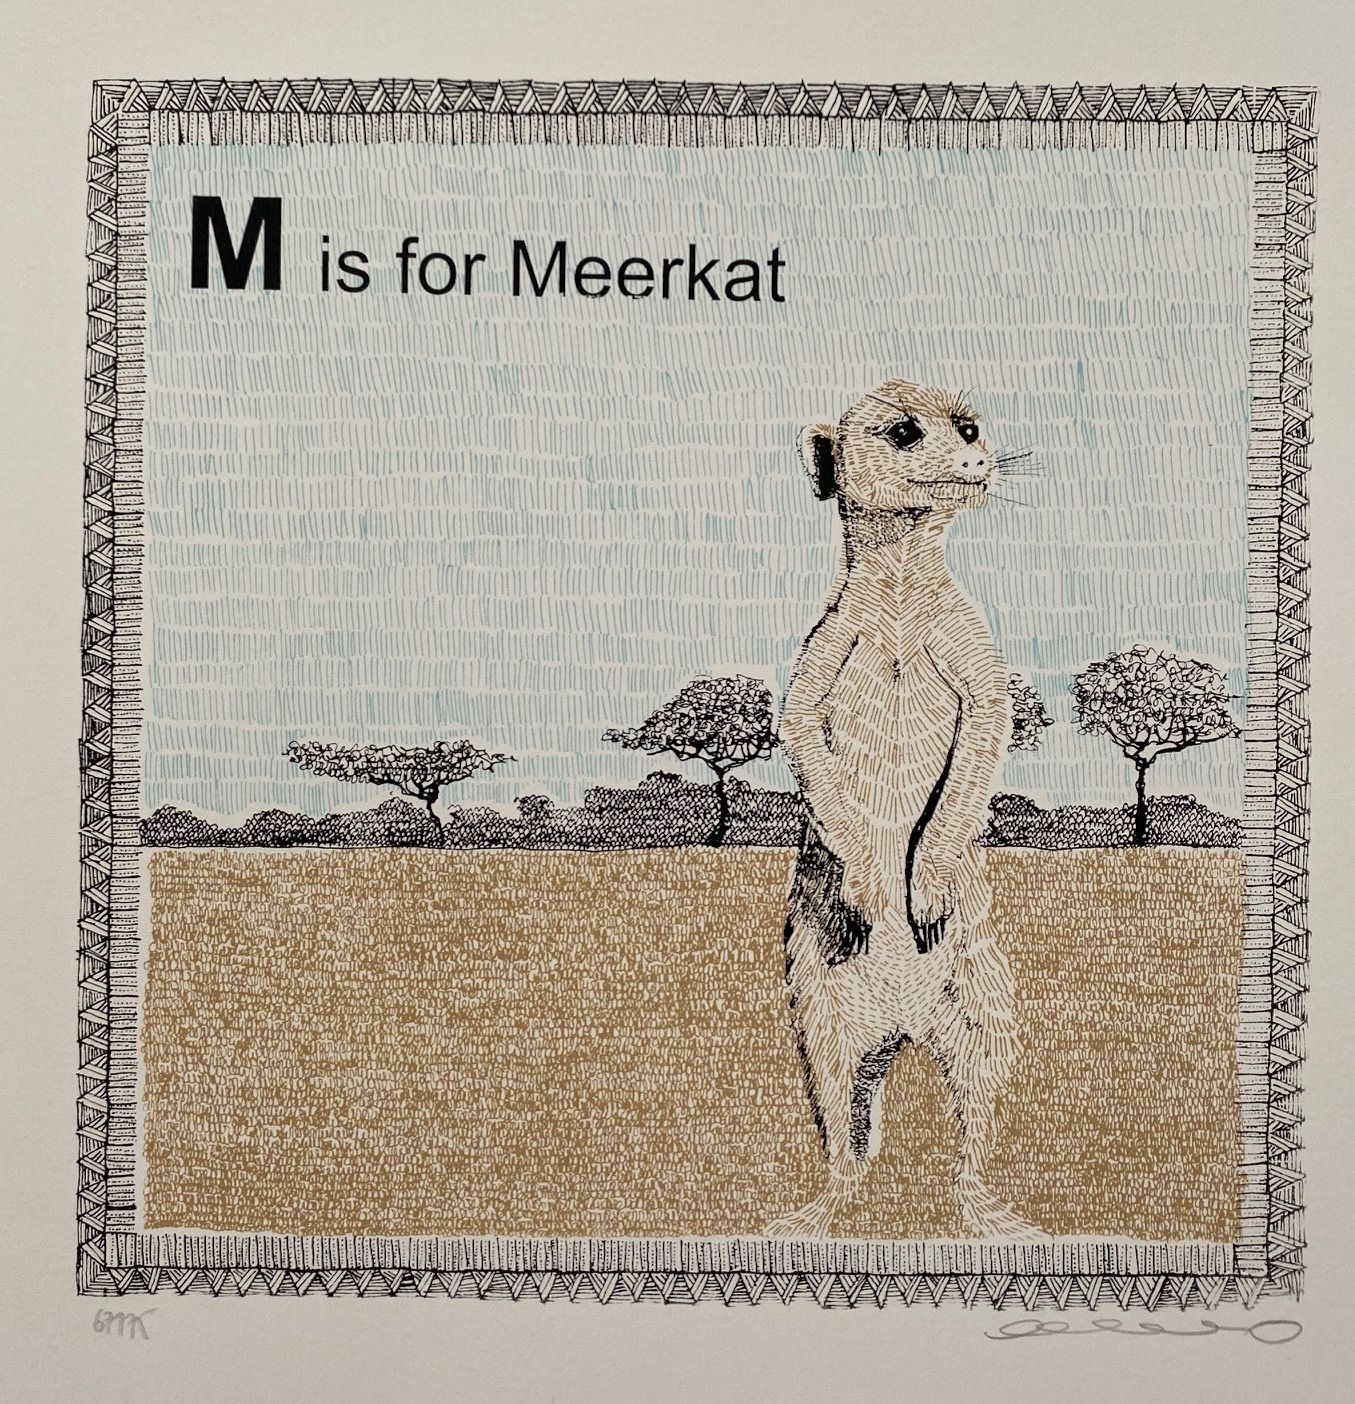 M is for Meerkat (small) by Clare Halifax